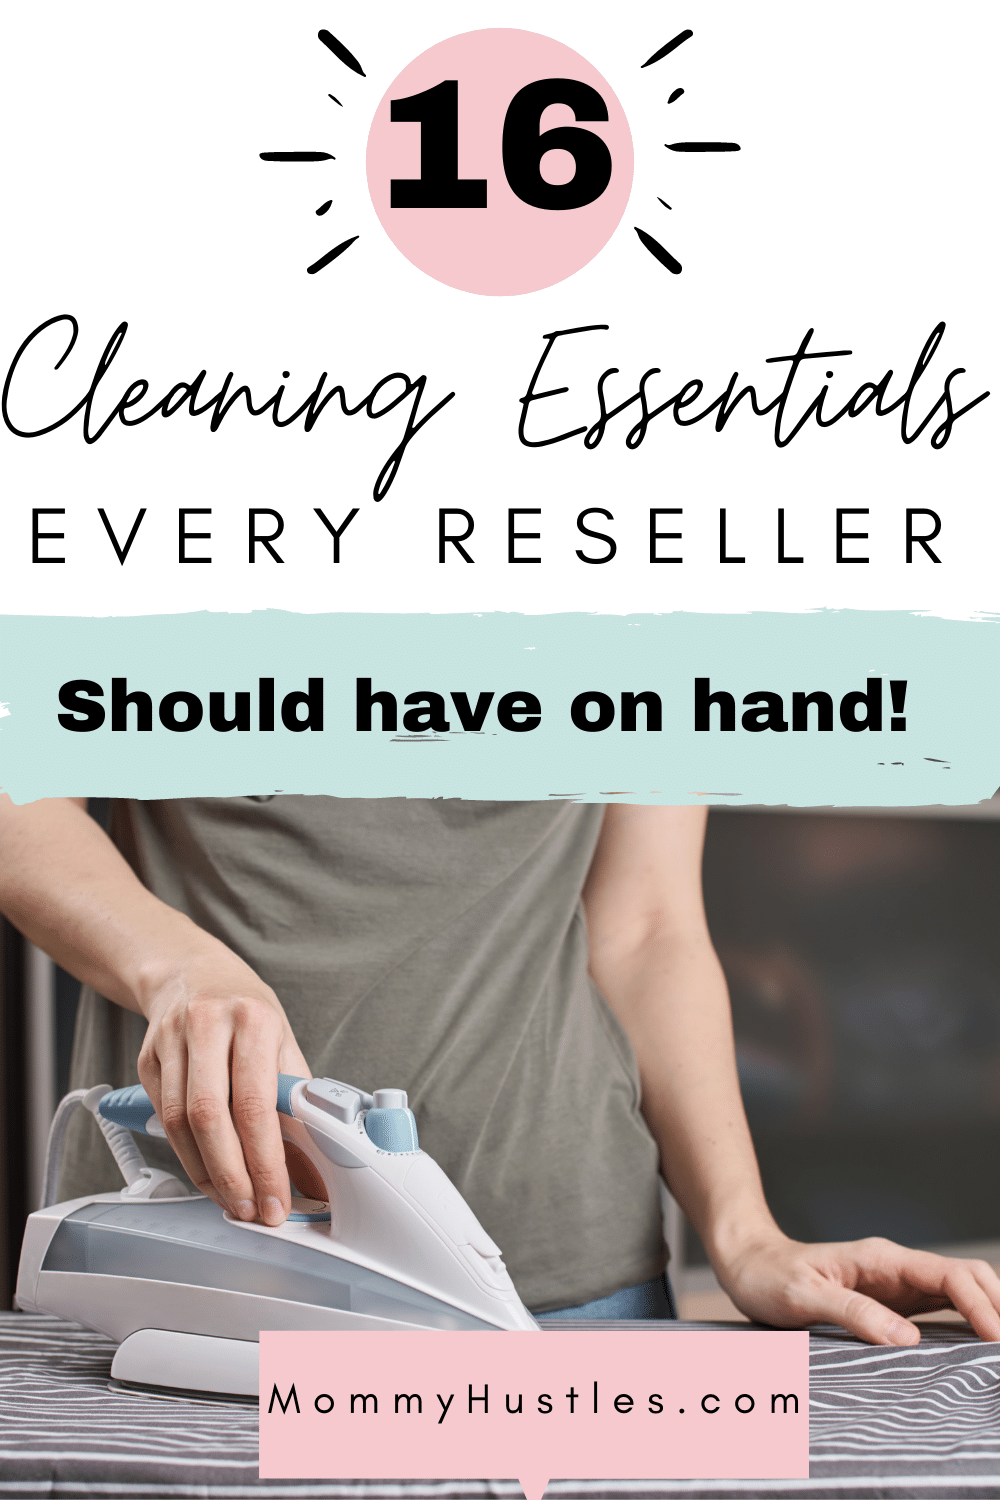 10 Must-Have Cleaning Essentials Every Reseller Should Have On Hand